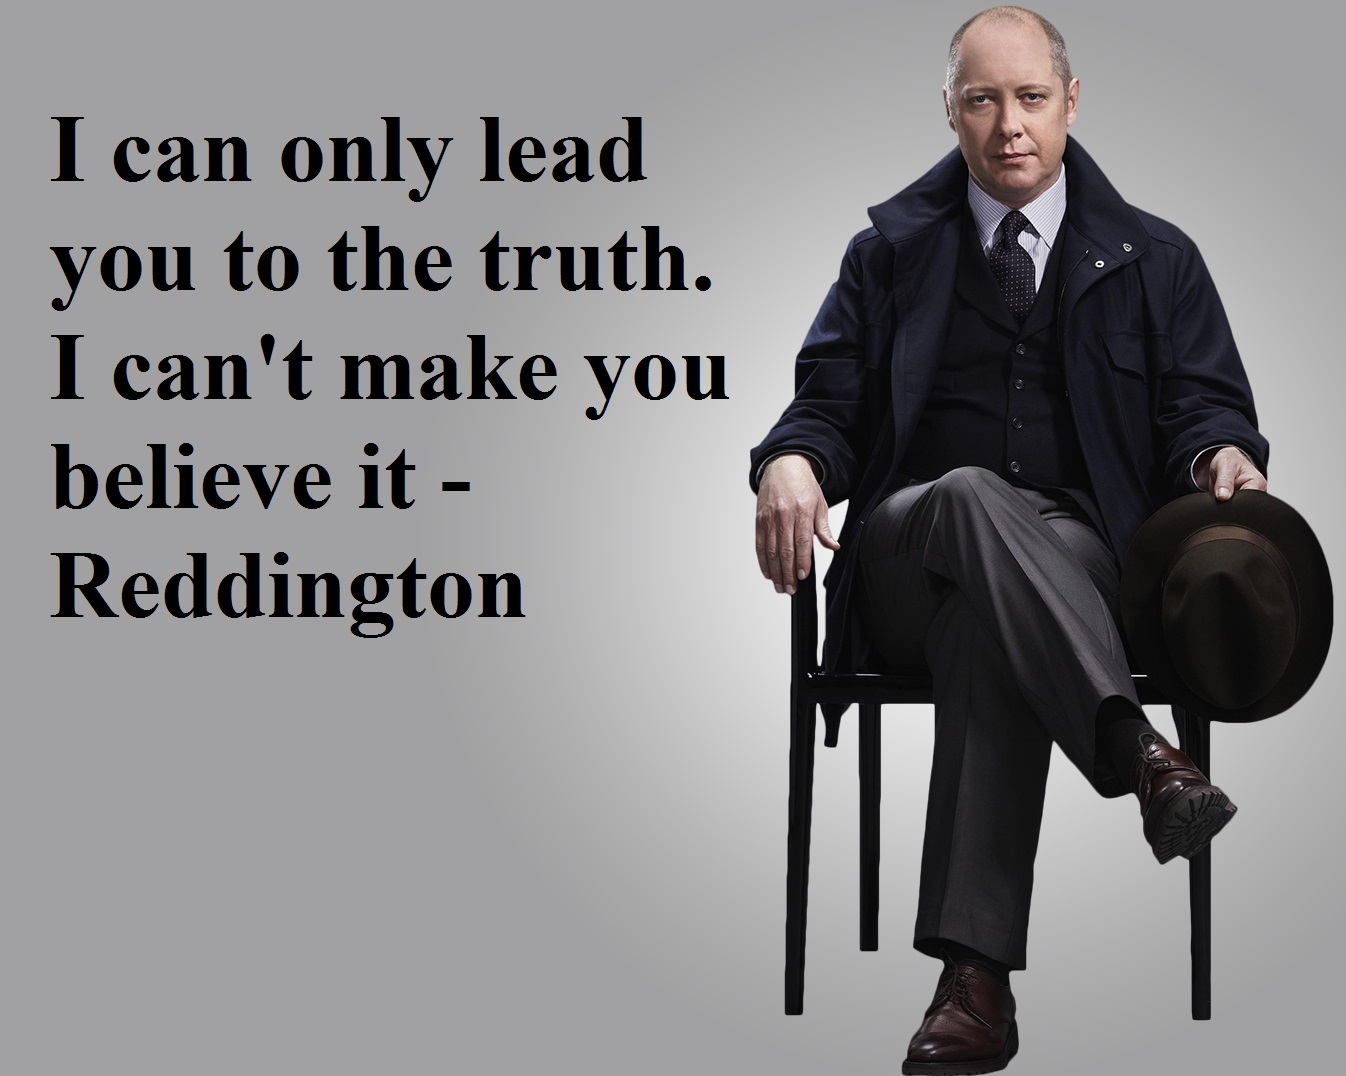 The Blacklist Quotes And Sayings. QuotesGram